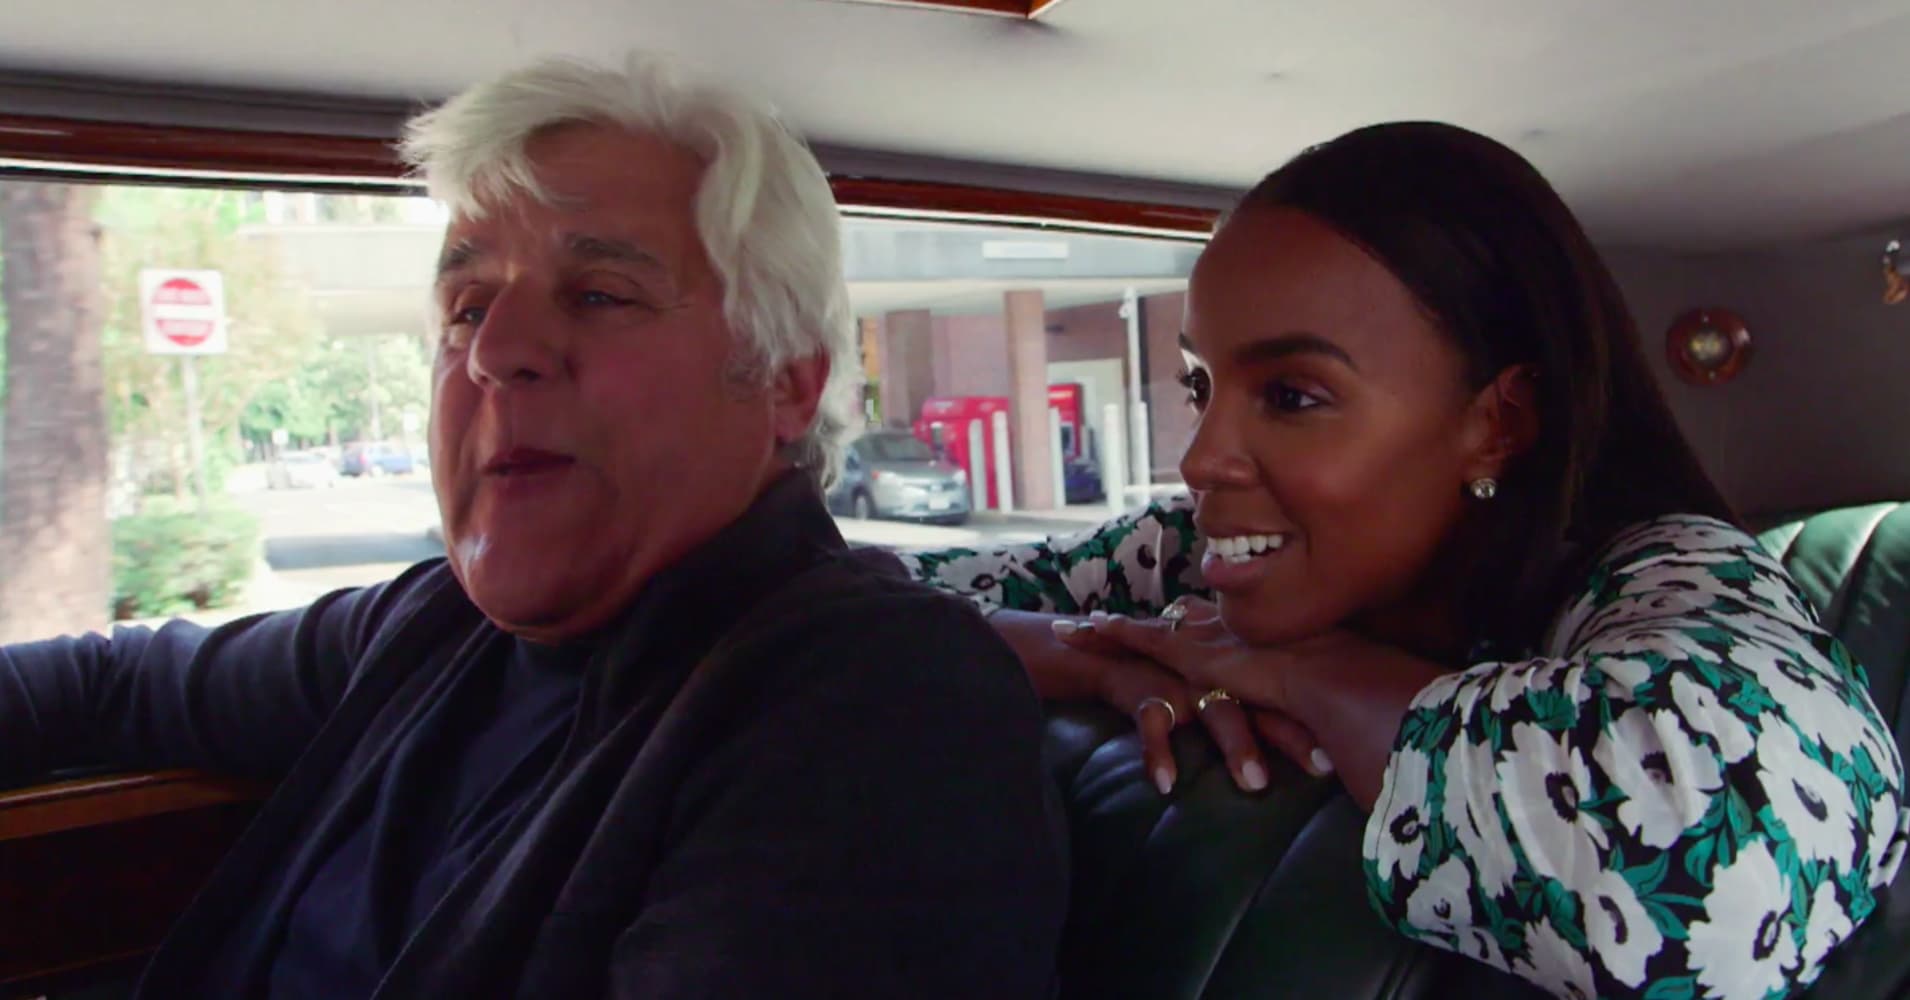 Jay Leno, Kelly Rowland talk cars while riding in a $1 million Bentley - CNBC